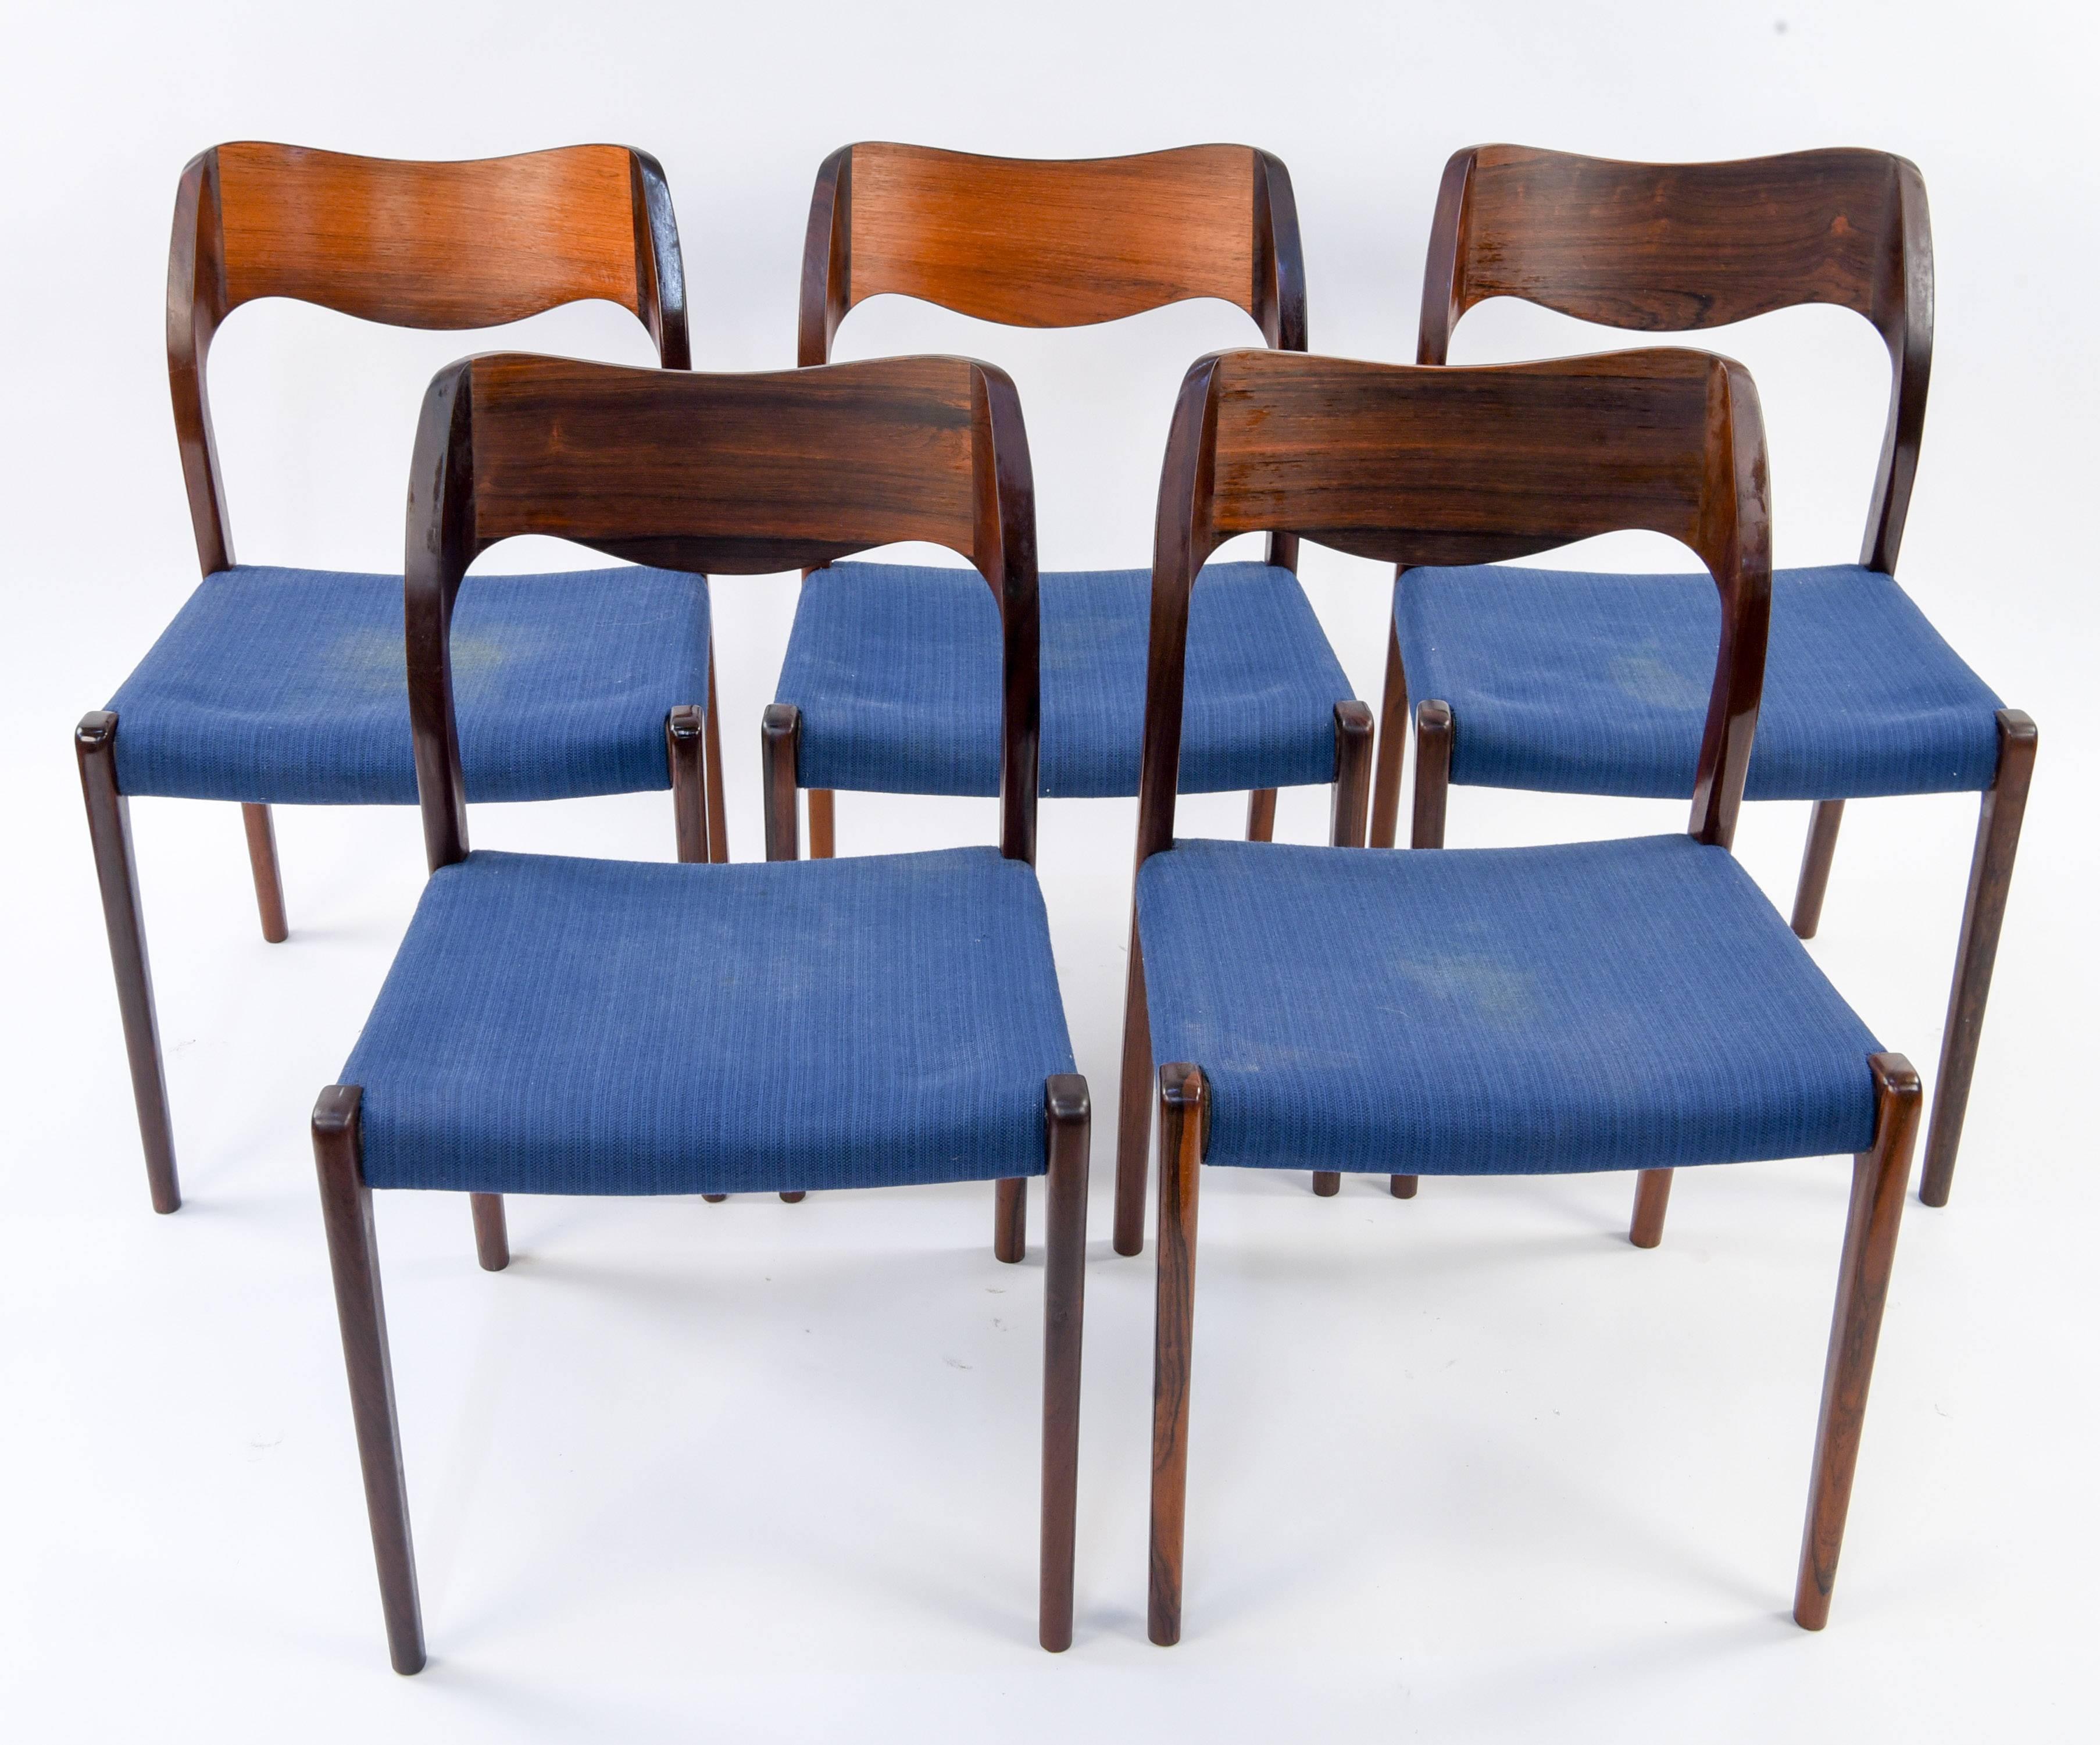 This is a wonderful set of five dining chairs produced by J.L. Møller, model no. 71 , designed by Arne Hovmand Olsen. Beautiful curved form for the backrests. A great example of Danish mid-century design, circa 1960s.